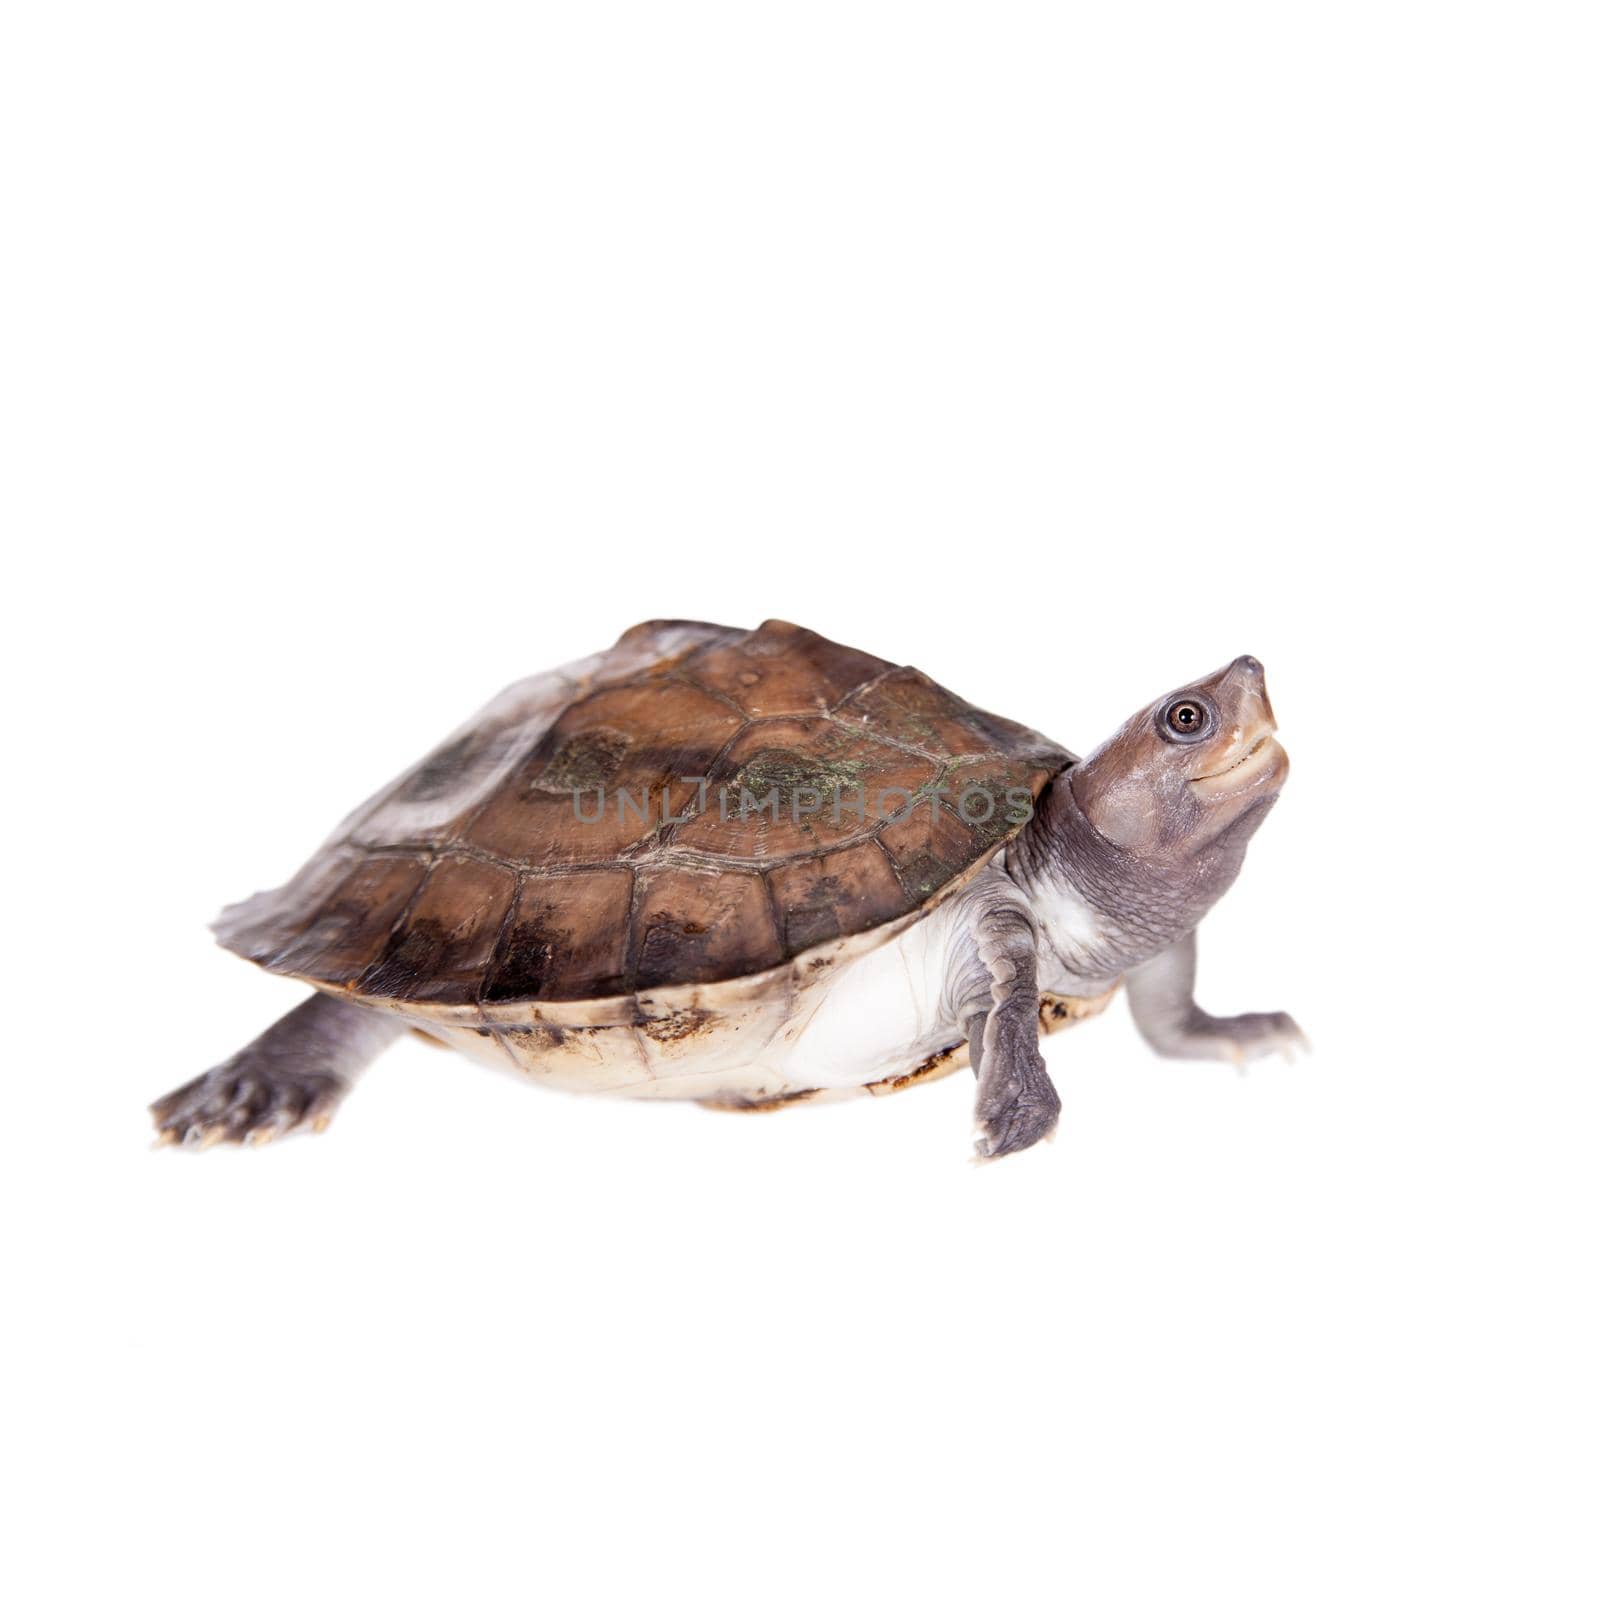 Painted river terrapin on white background. by RosaJay